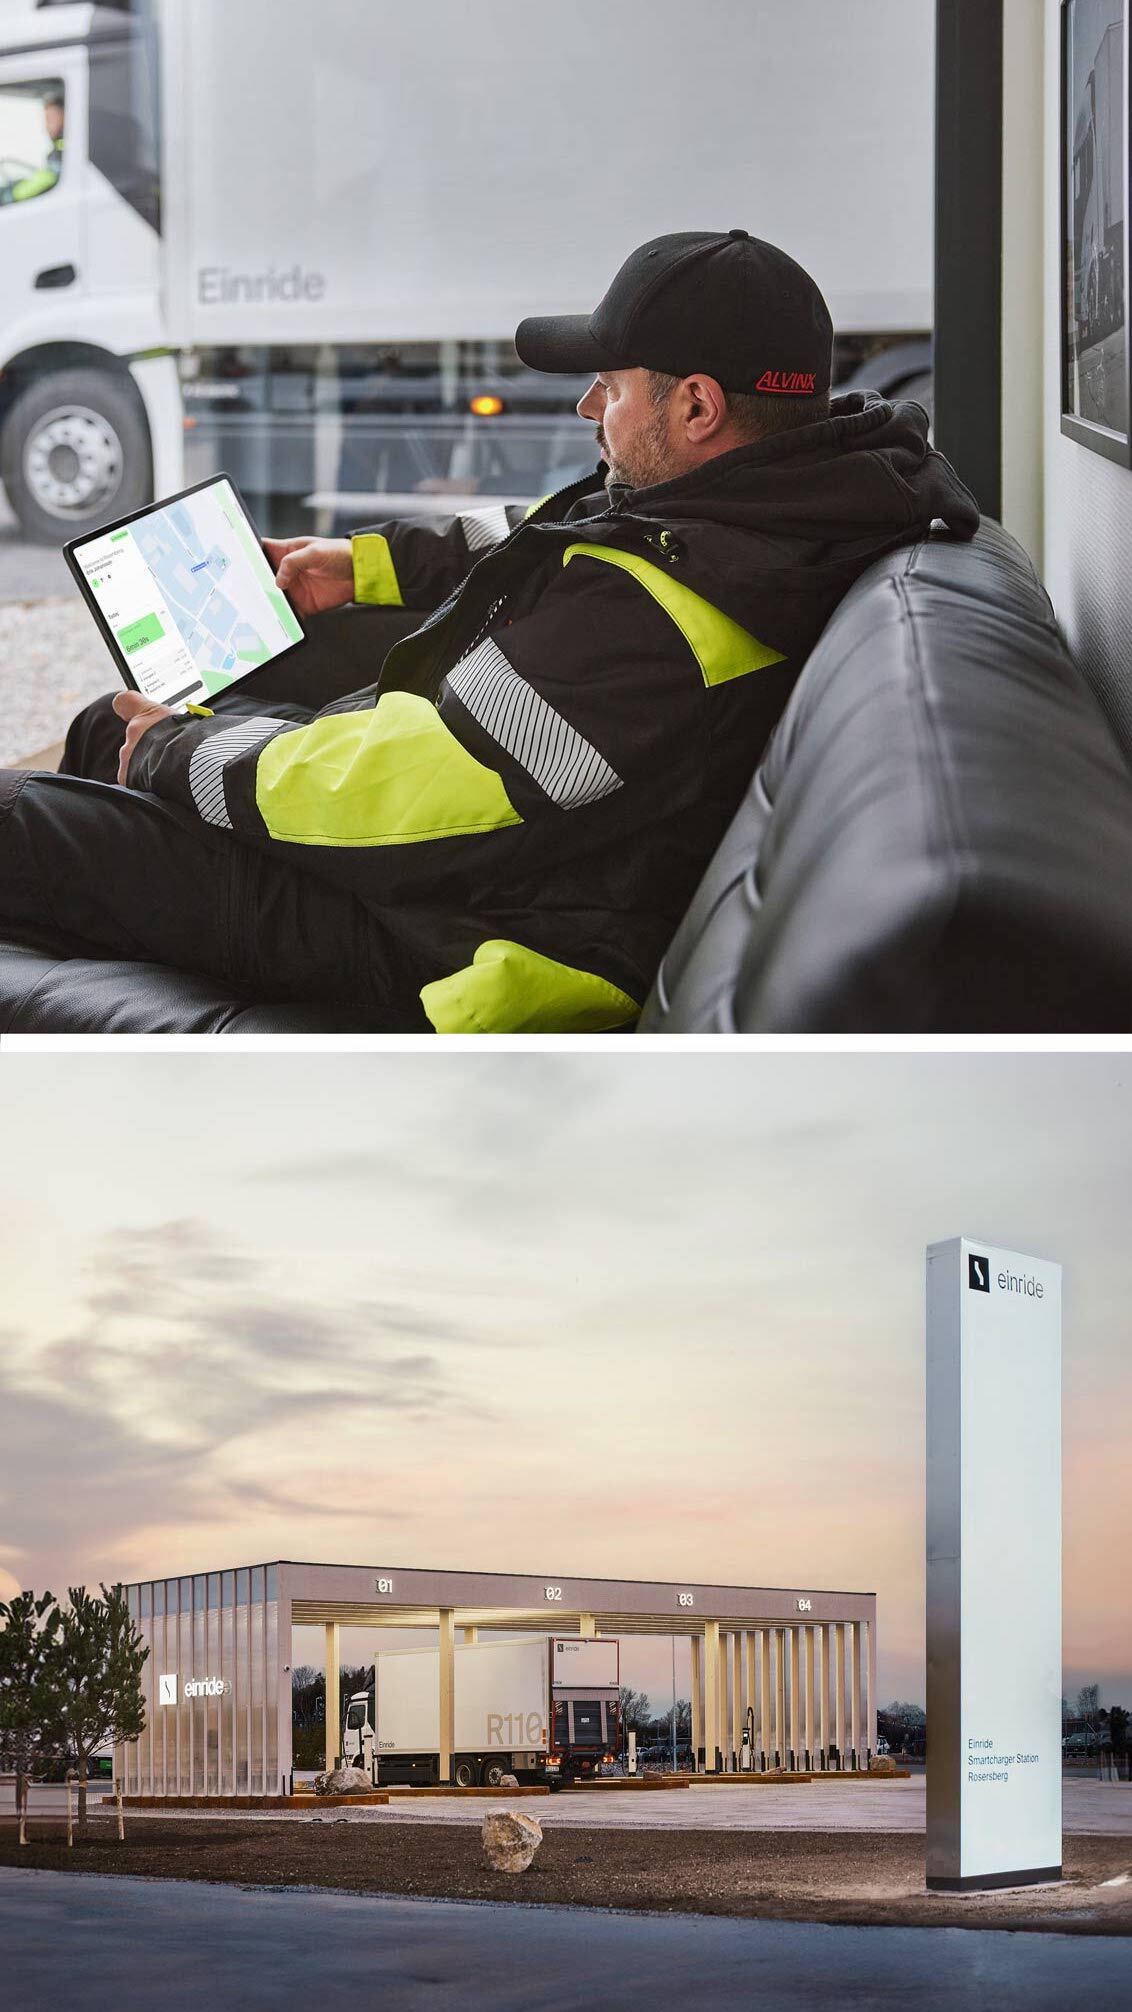 A photo of a driver inside our charging station on top of a photo of the station from the outside.